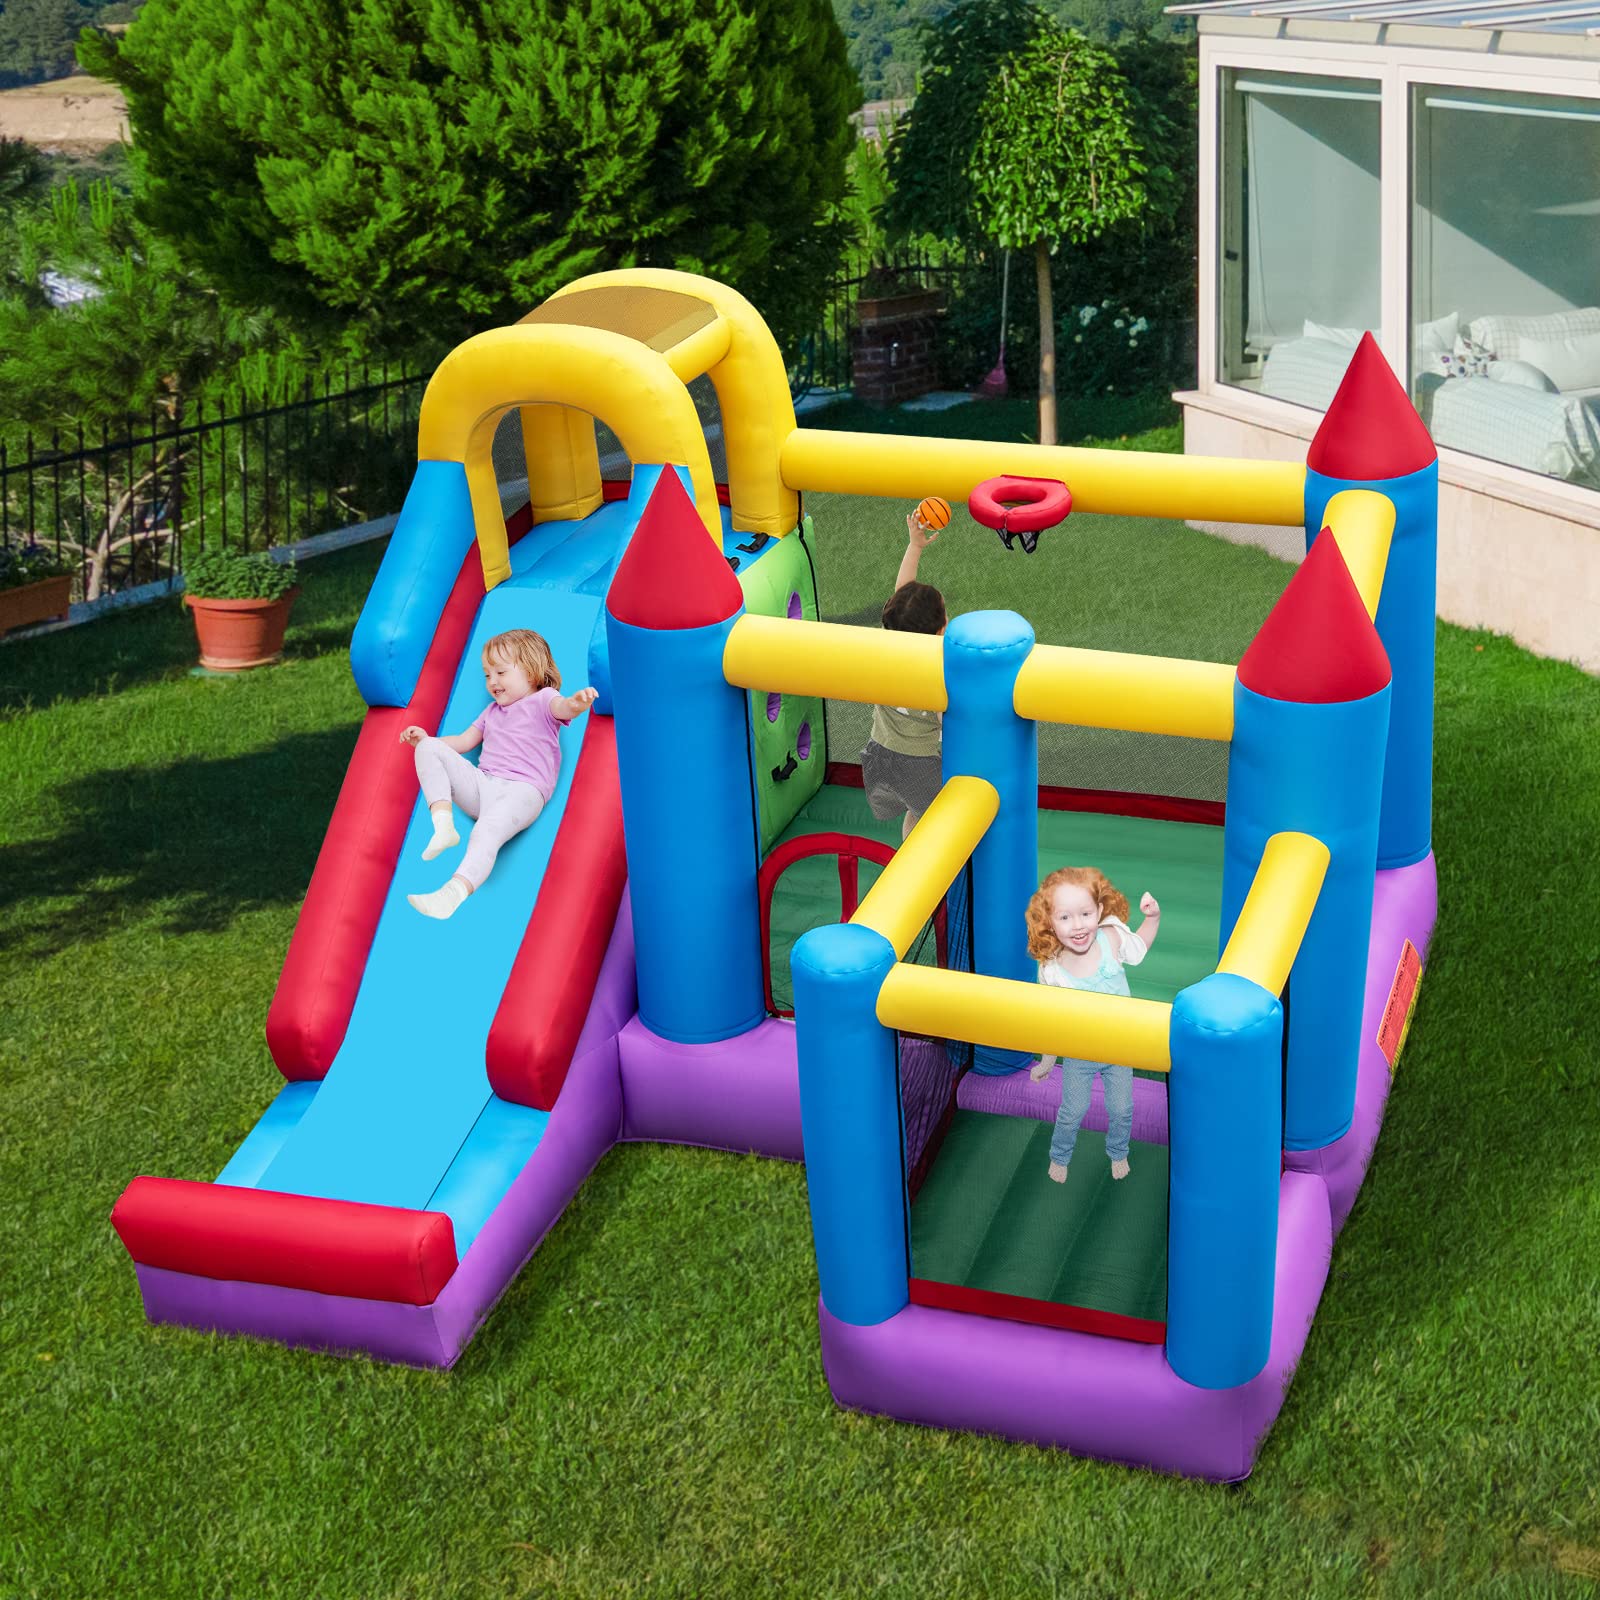 5-in-1 Inflatable Bounce Castle, Giant Blowup Jumping House with Slide for Kids w/735W Air Blower